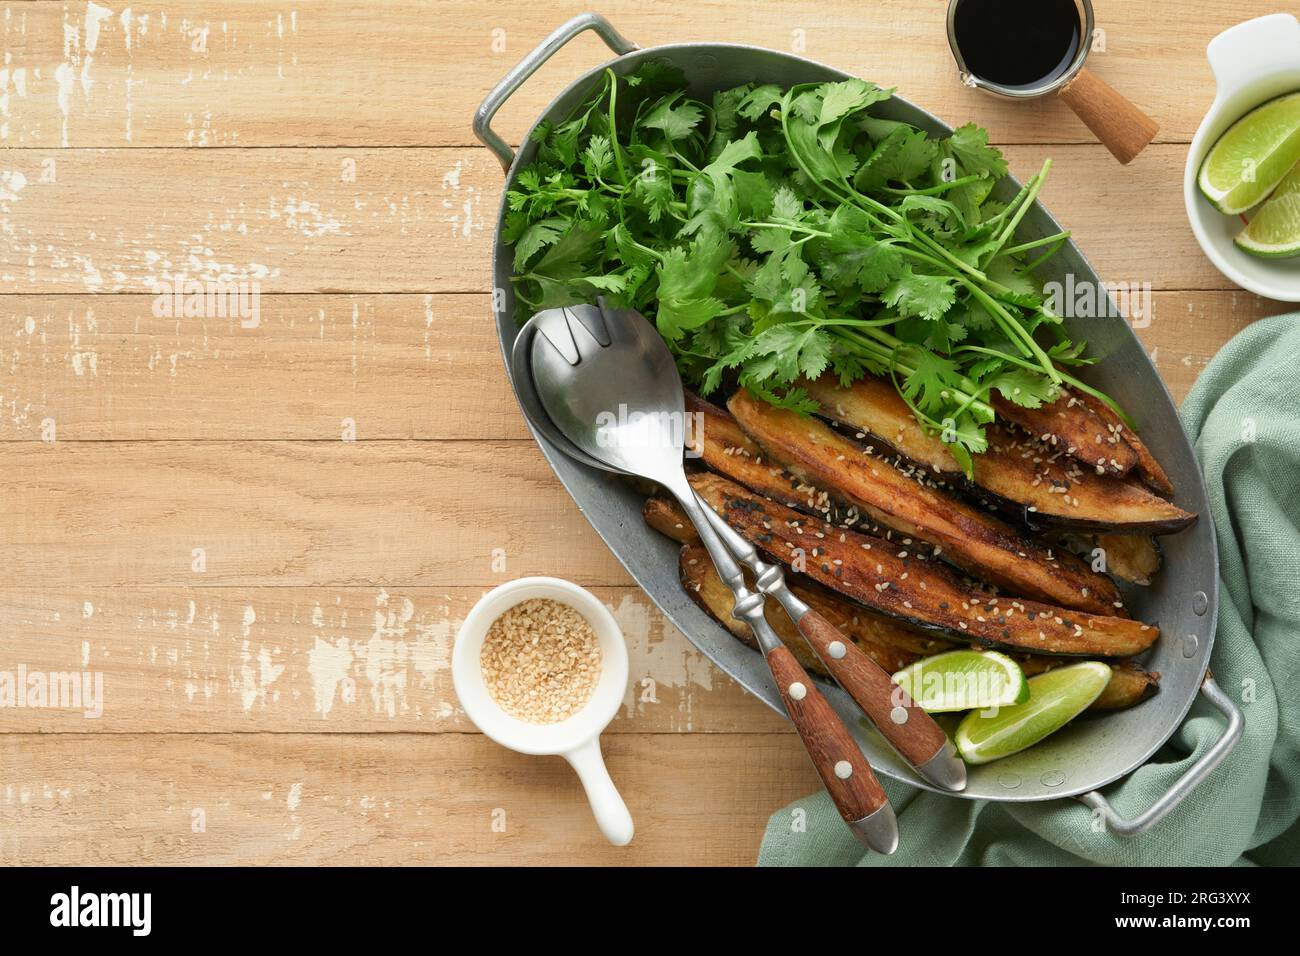 Grilled or baked eggplant slices in rice flour, with cilantro and soy sauce on old rustic wooden rustic table background. Top view with copy space. Stock Photo